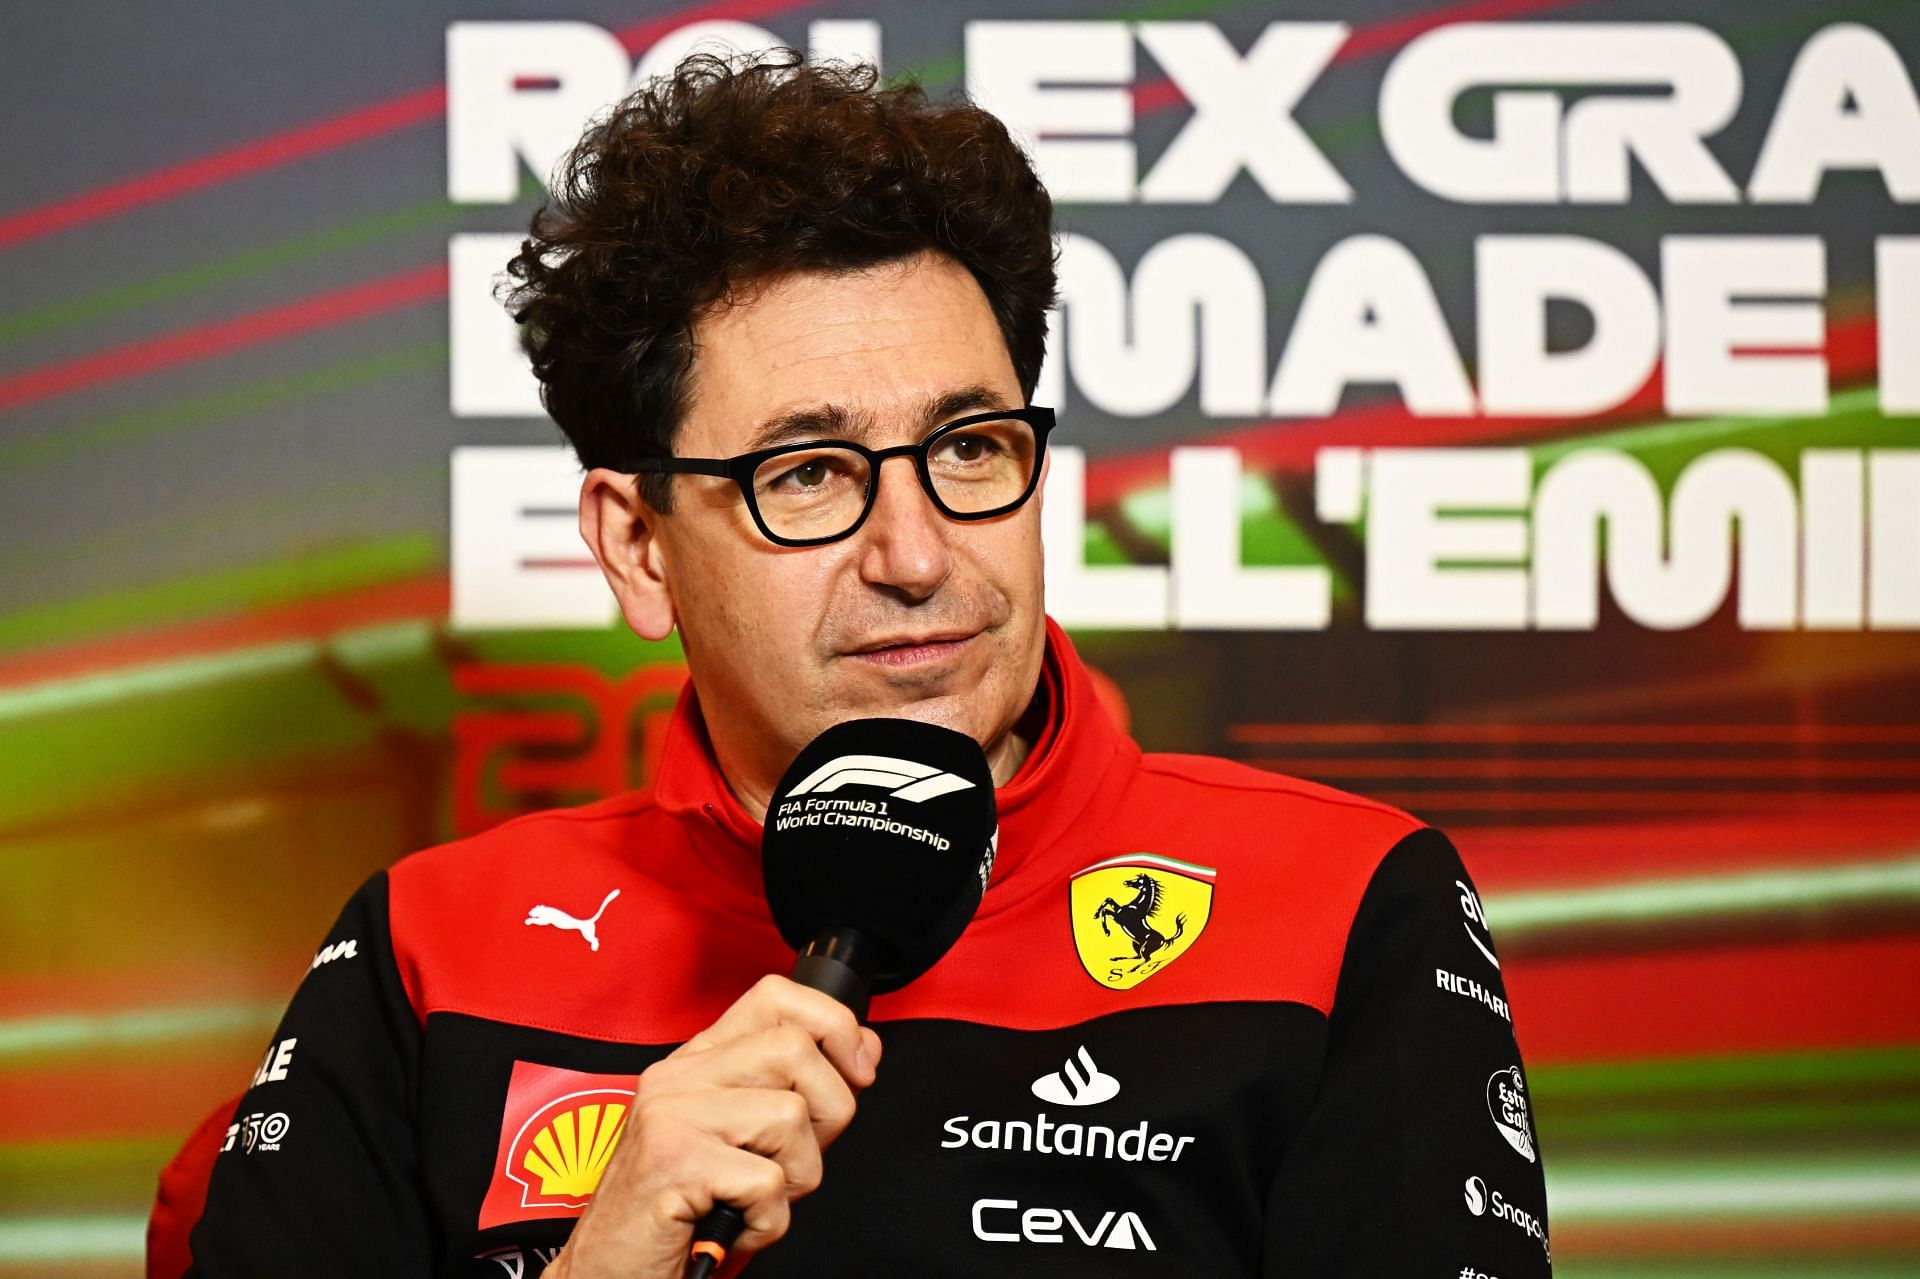 "It is on the agenda" Ferrari team boss in agreement with F1 about having 6 Sprint race